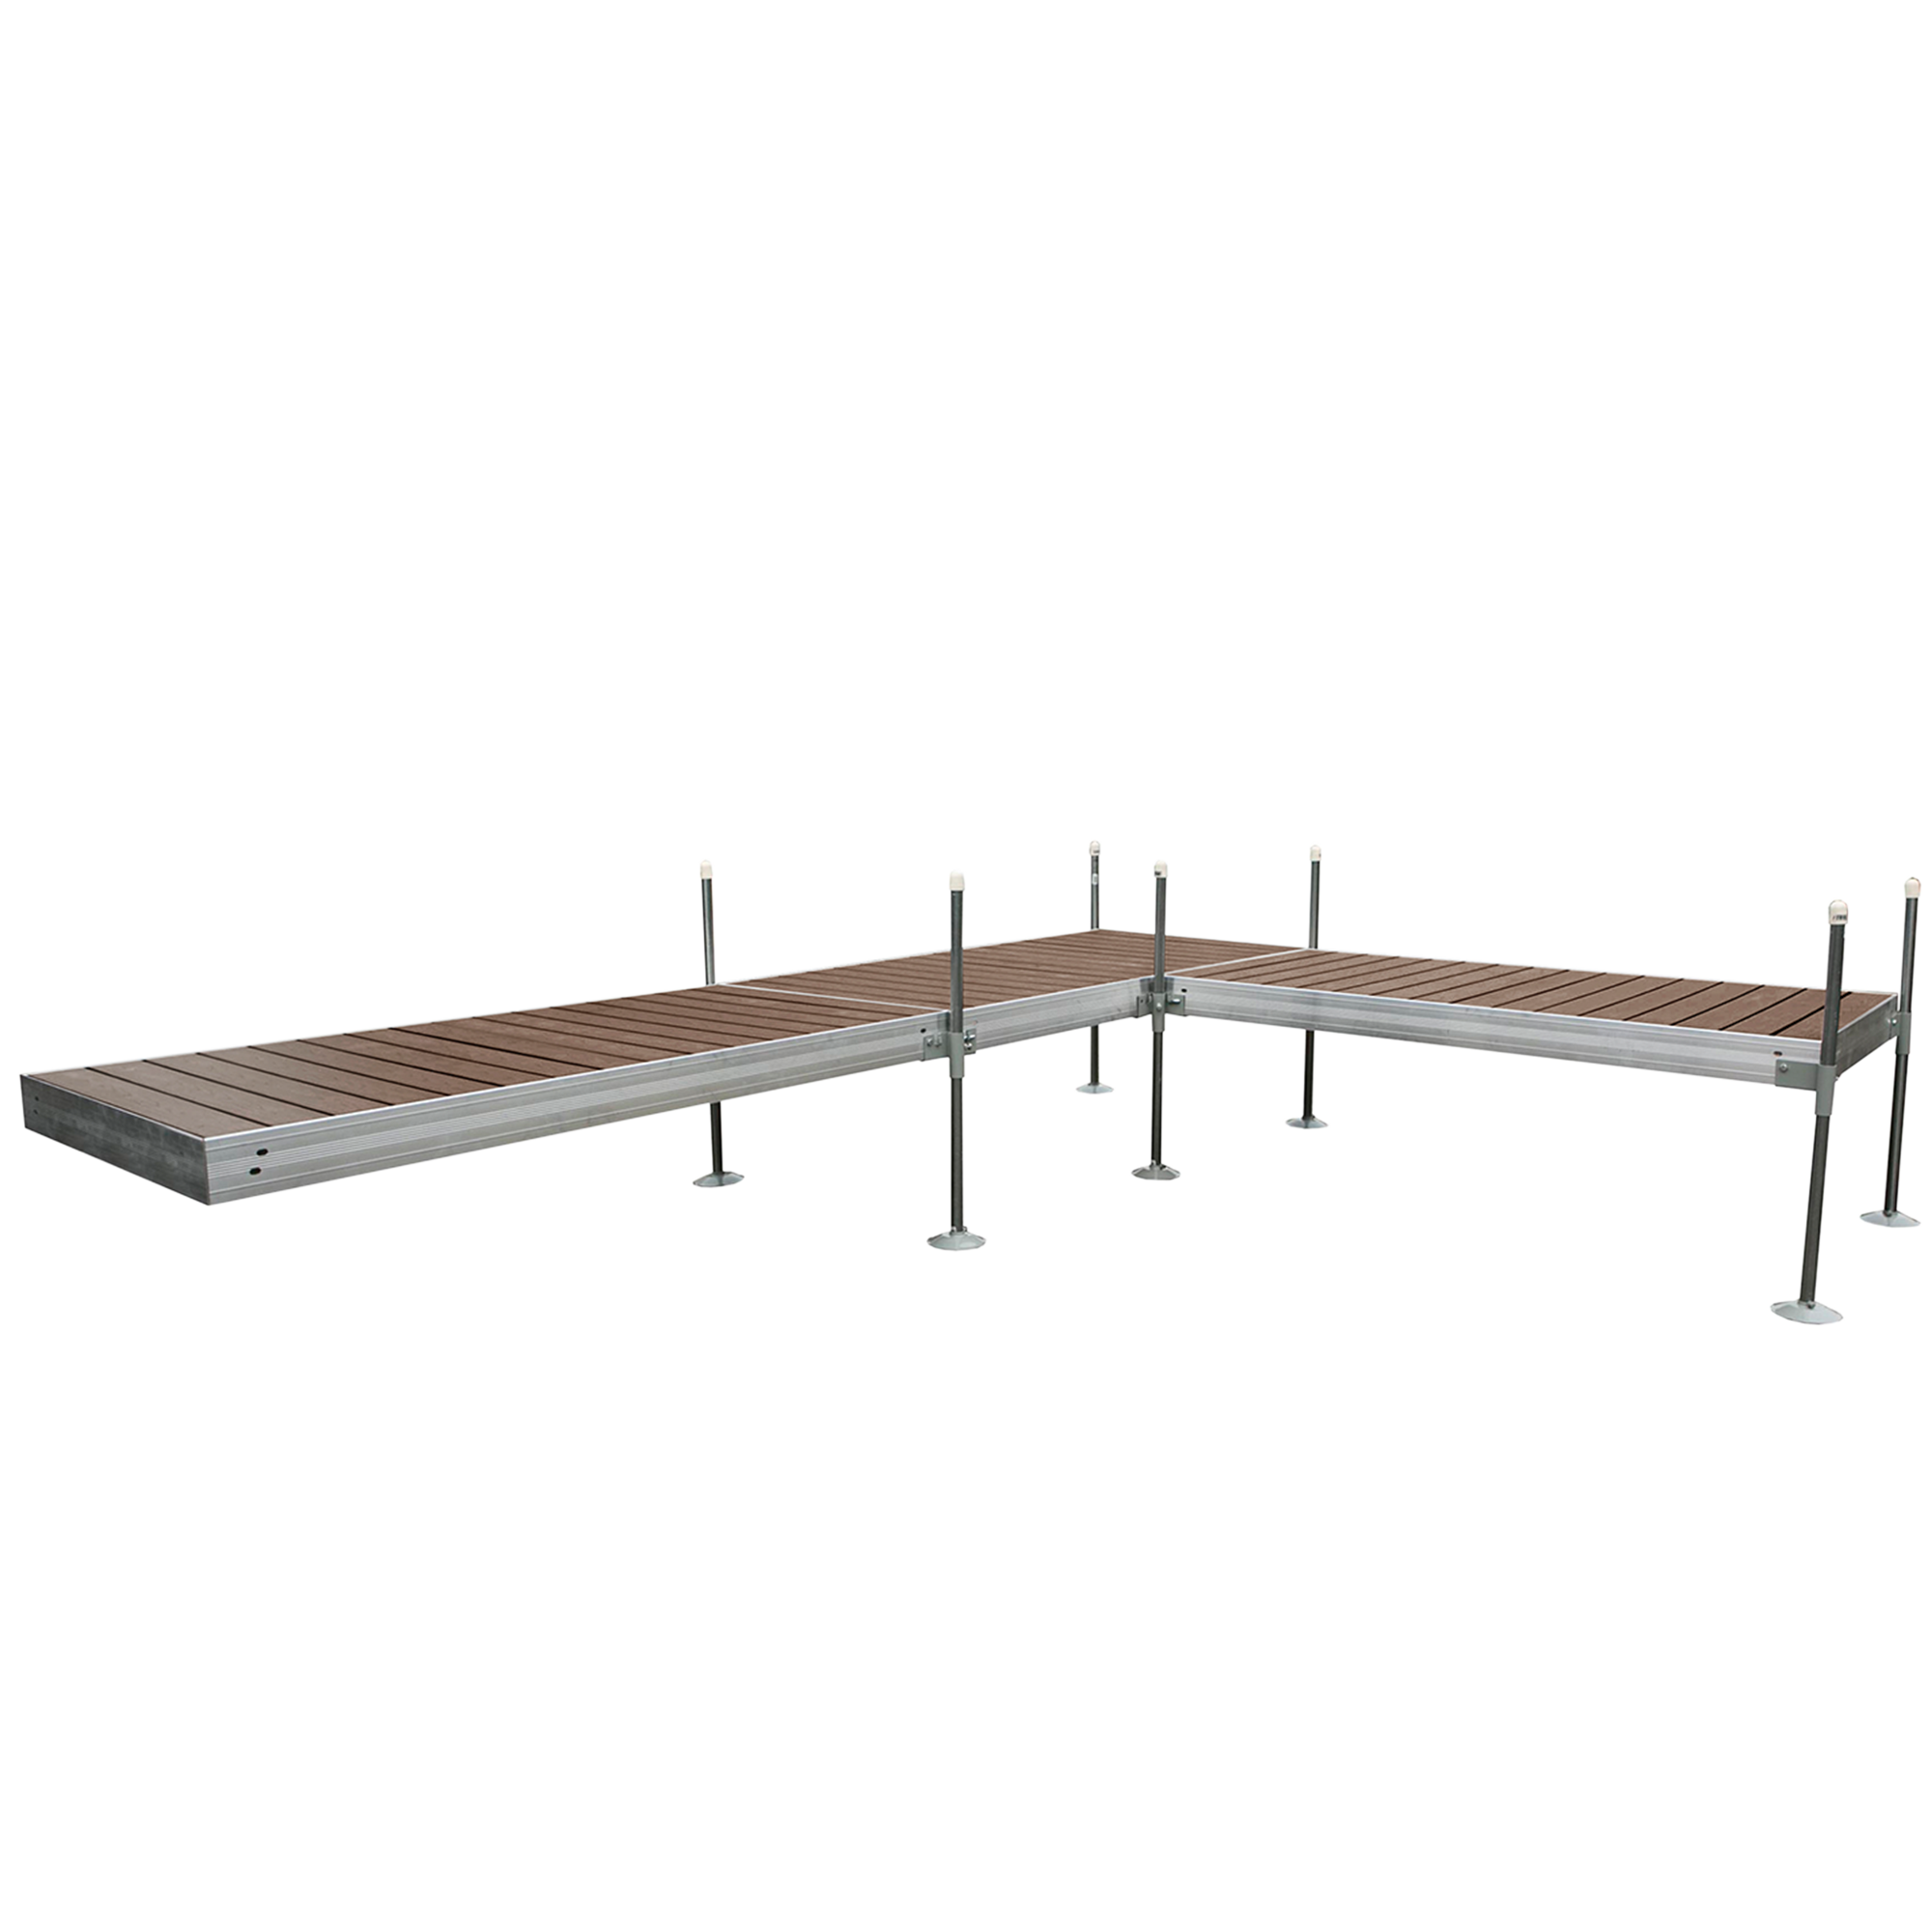 16' L-Shaped Boat Dock System with Aluminum Frame and Brown Composite Decking